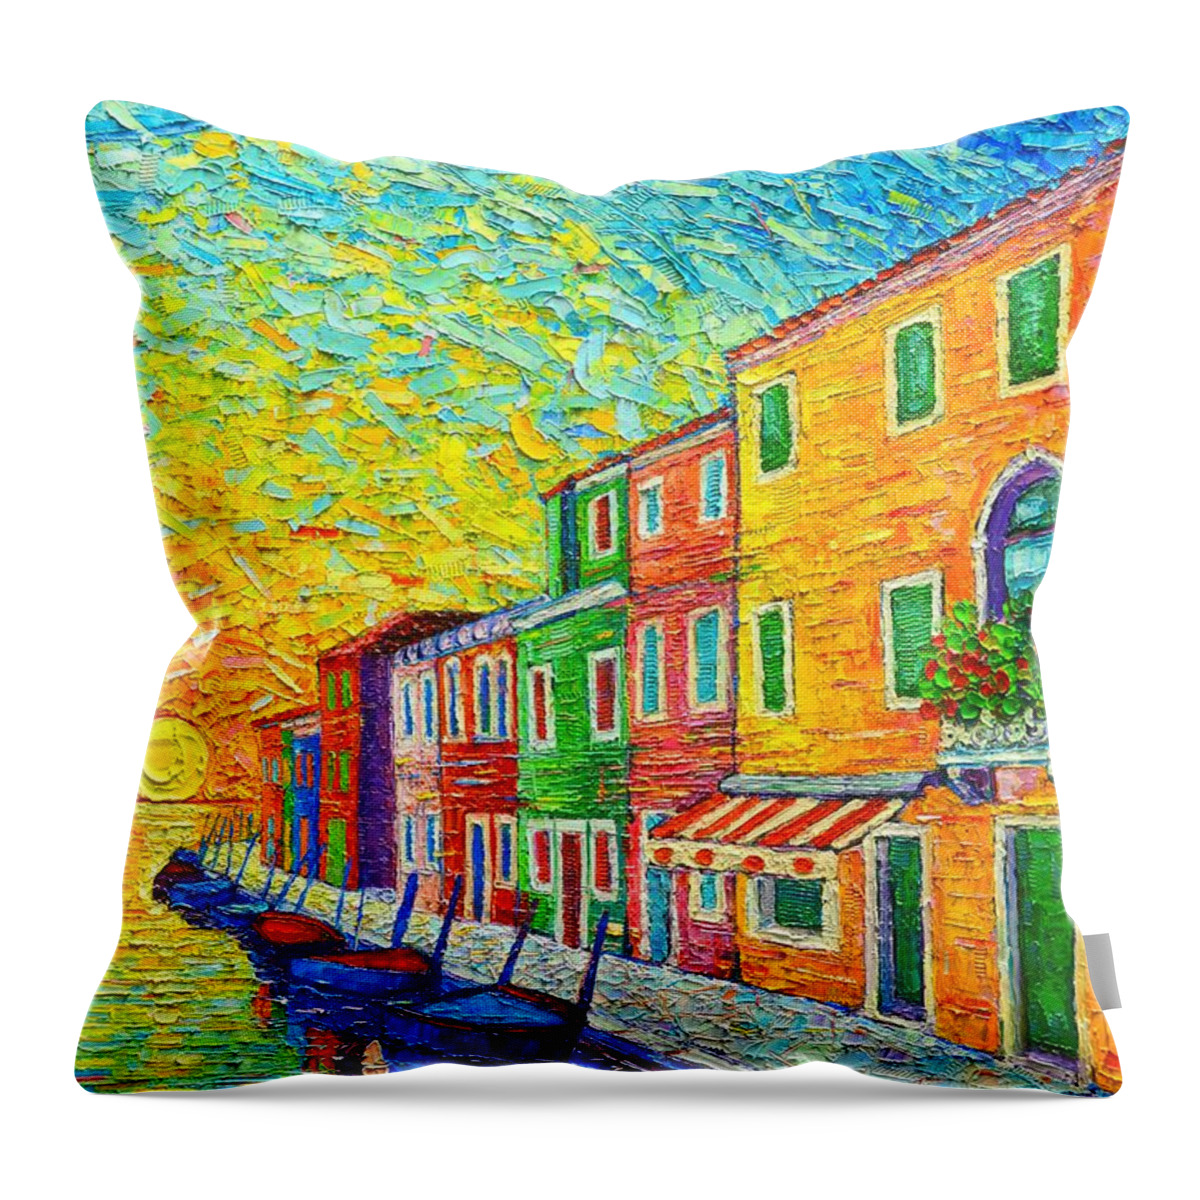 Venice Throw Pillow featuring the painting Colorful Burano Sunrise - Venice - Italy - Palette Knife Oil Painting By Ana Maria Edulescu by Ana Maria Edulescu